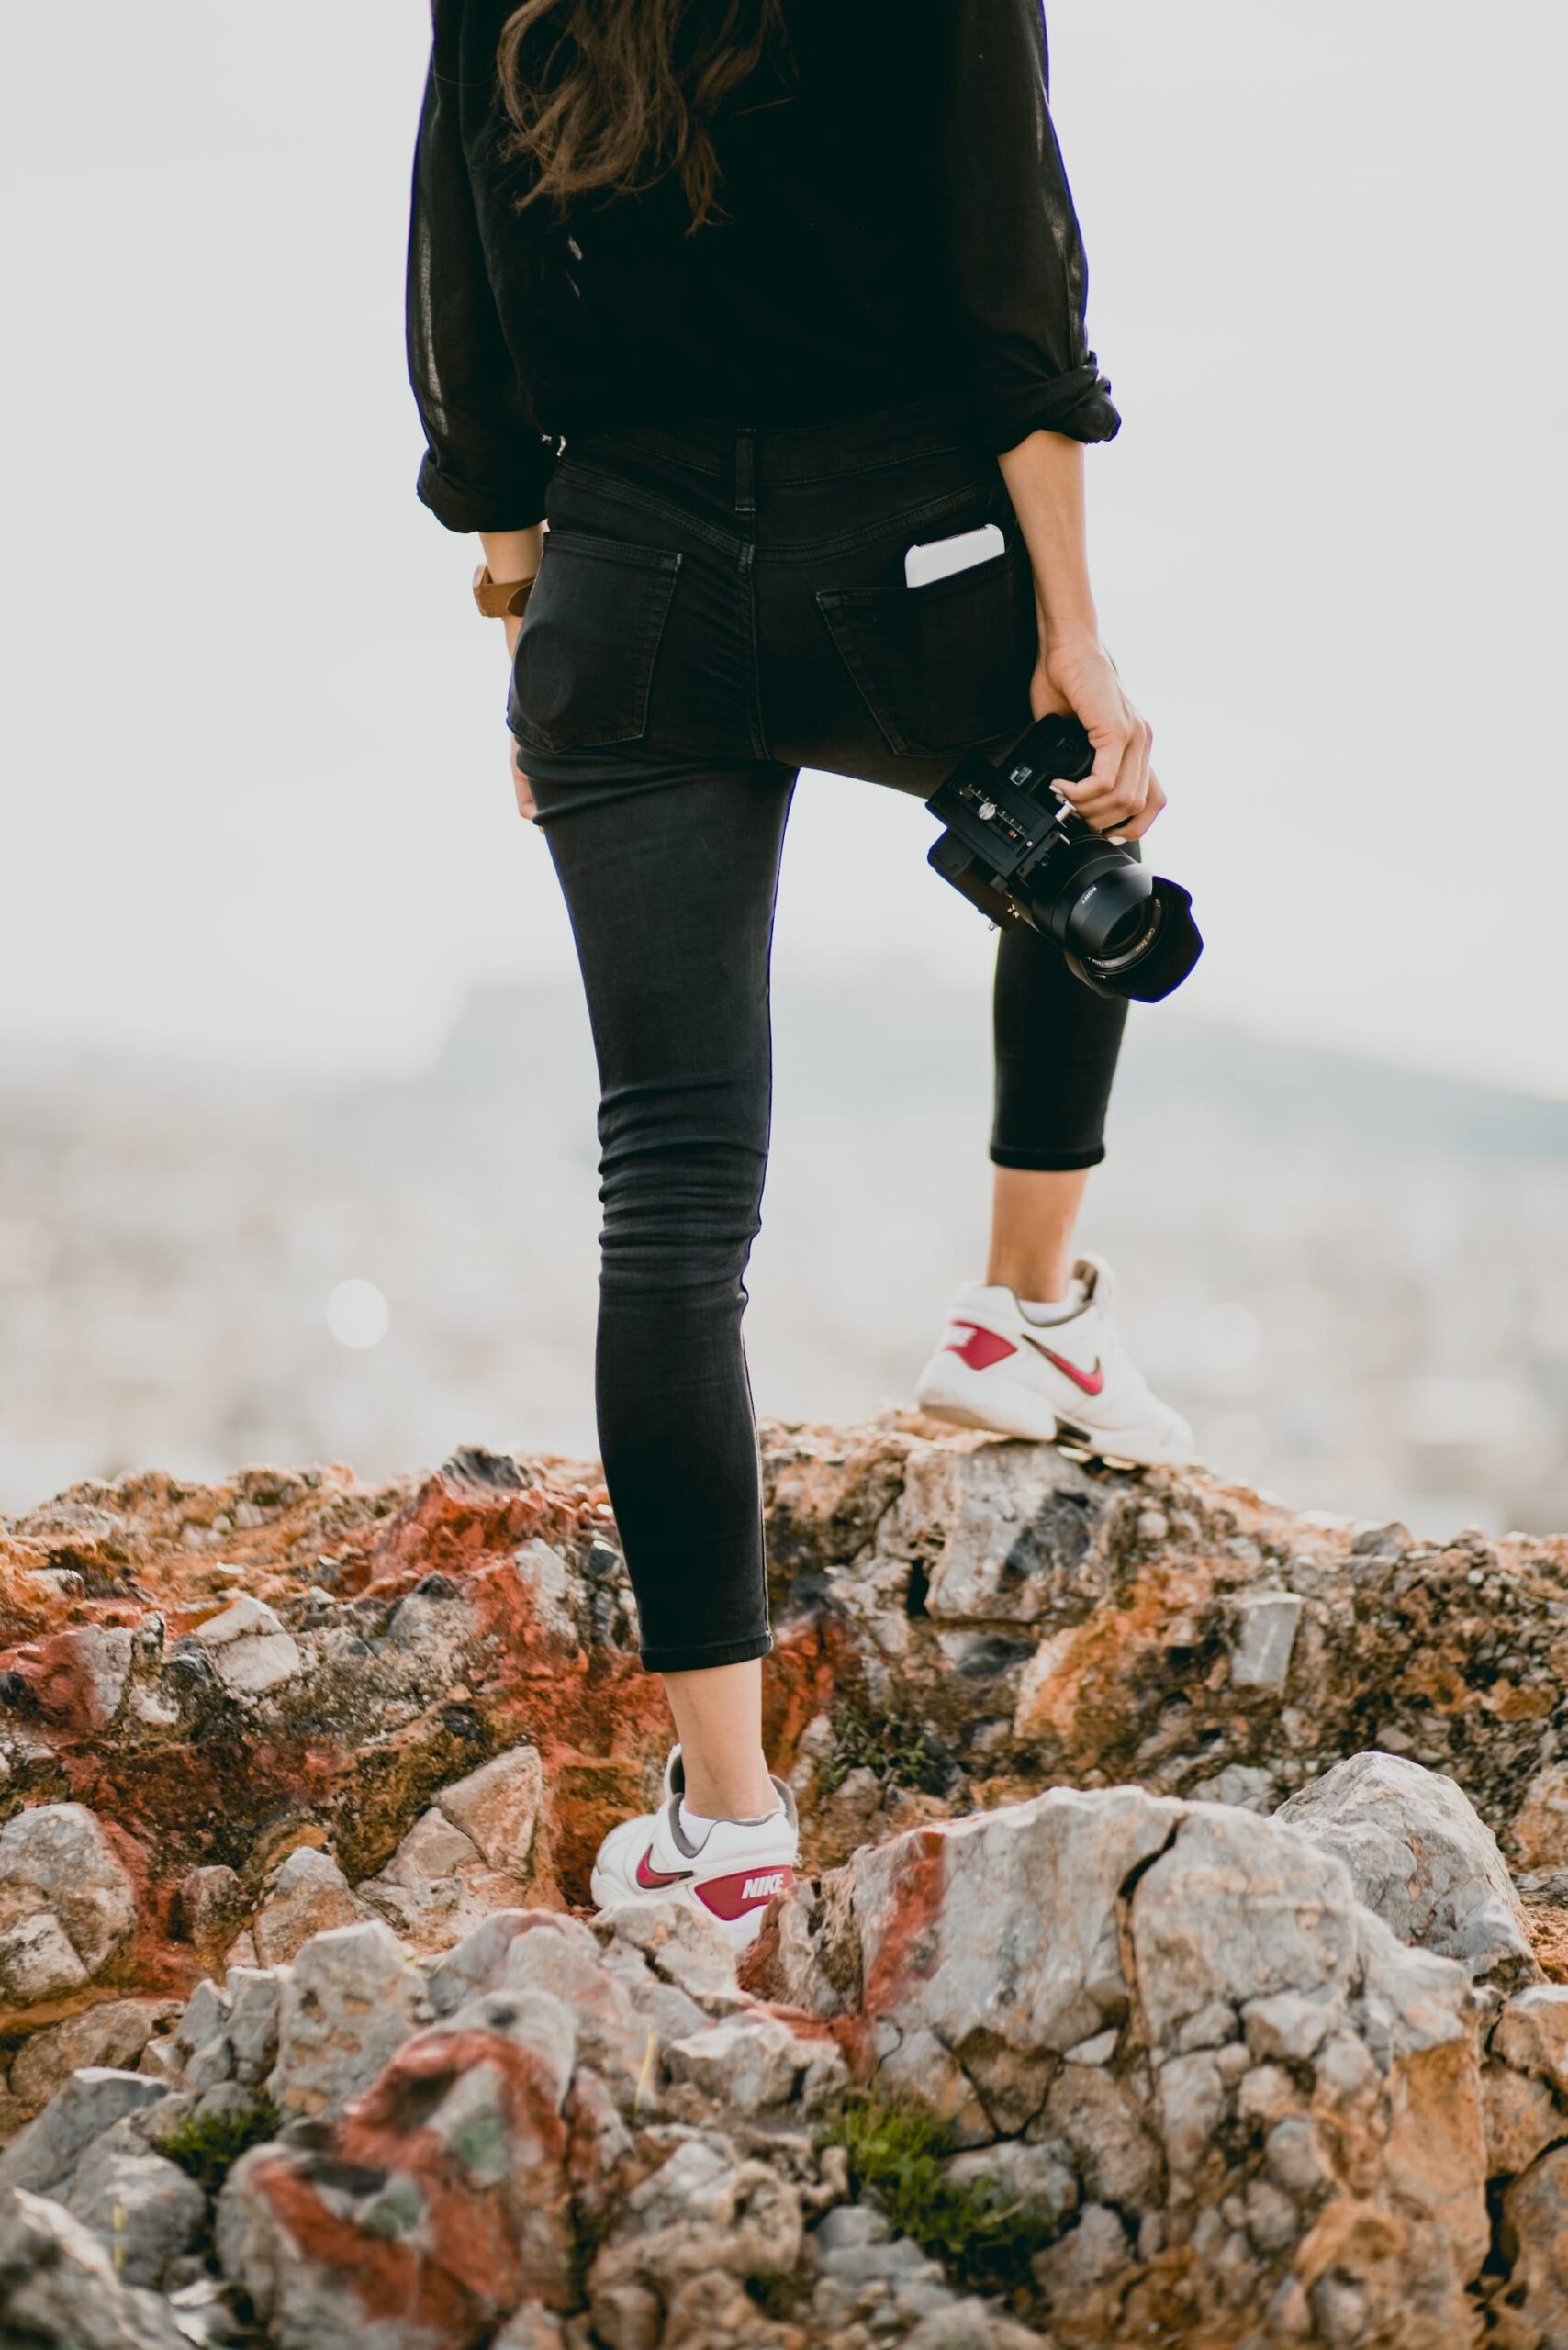 A picture of a woman with a camera